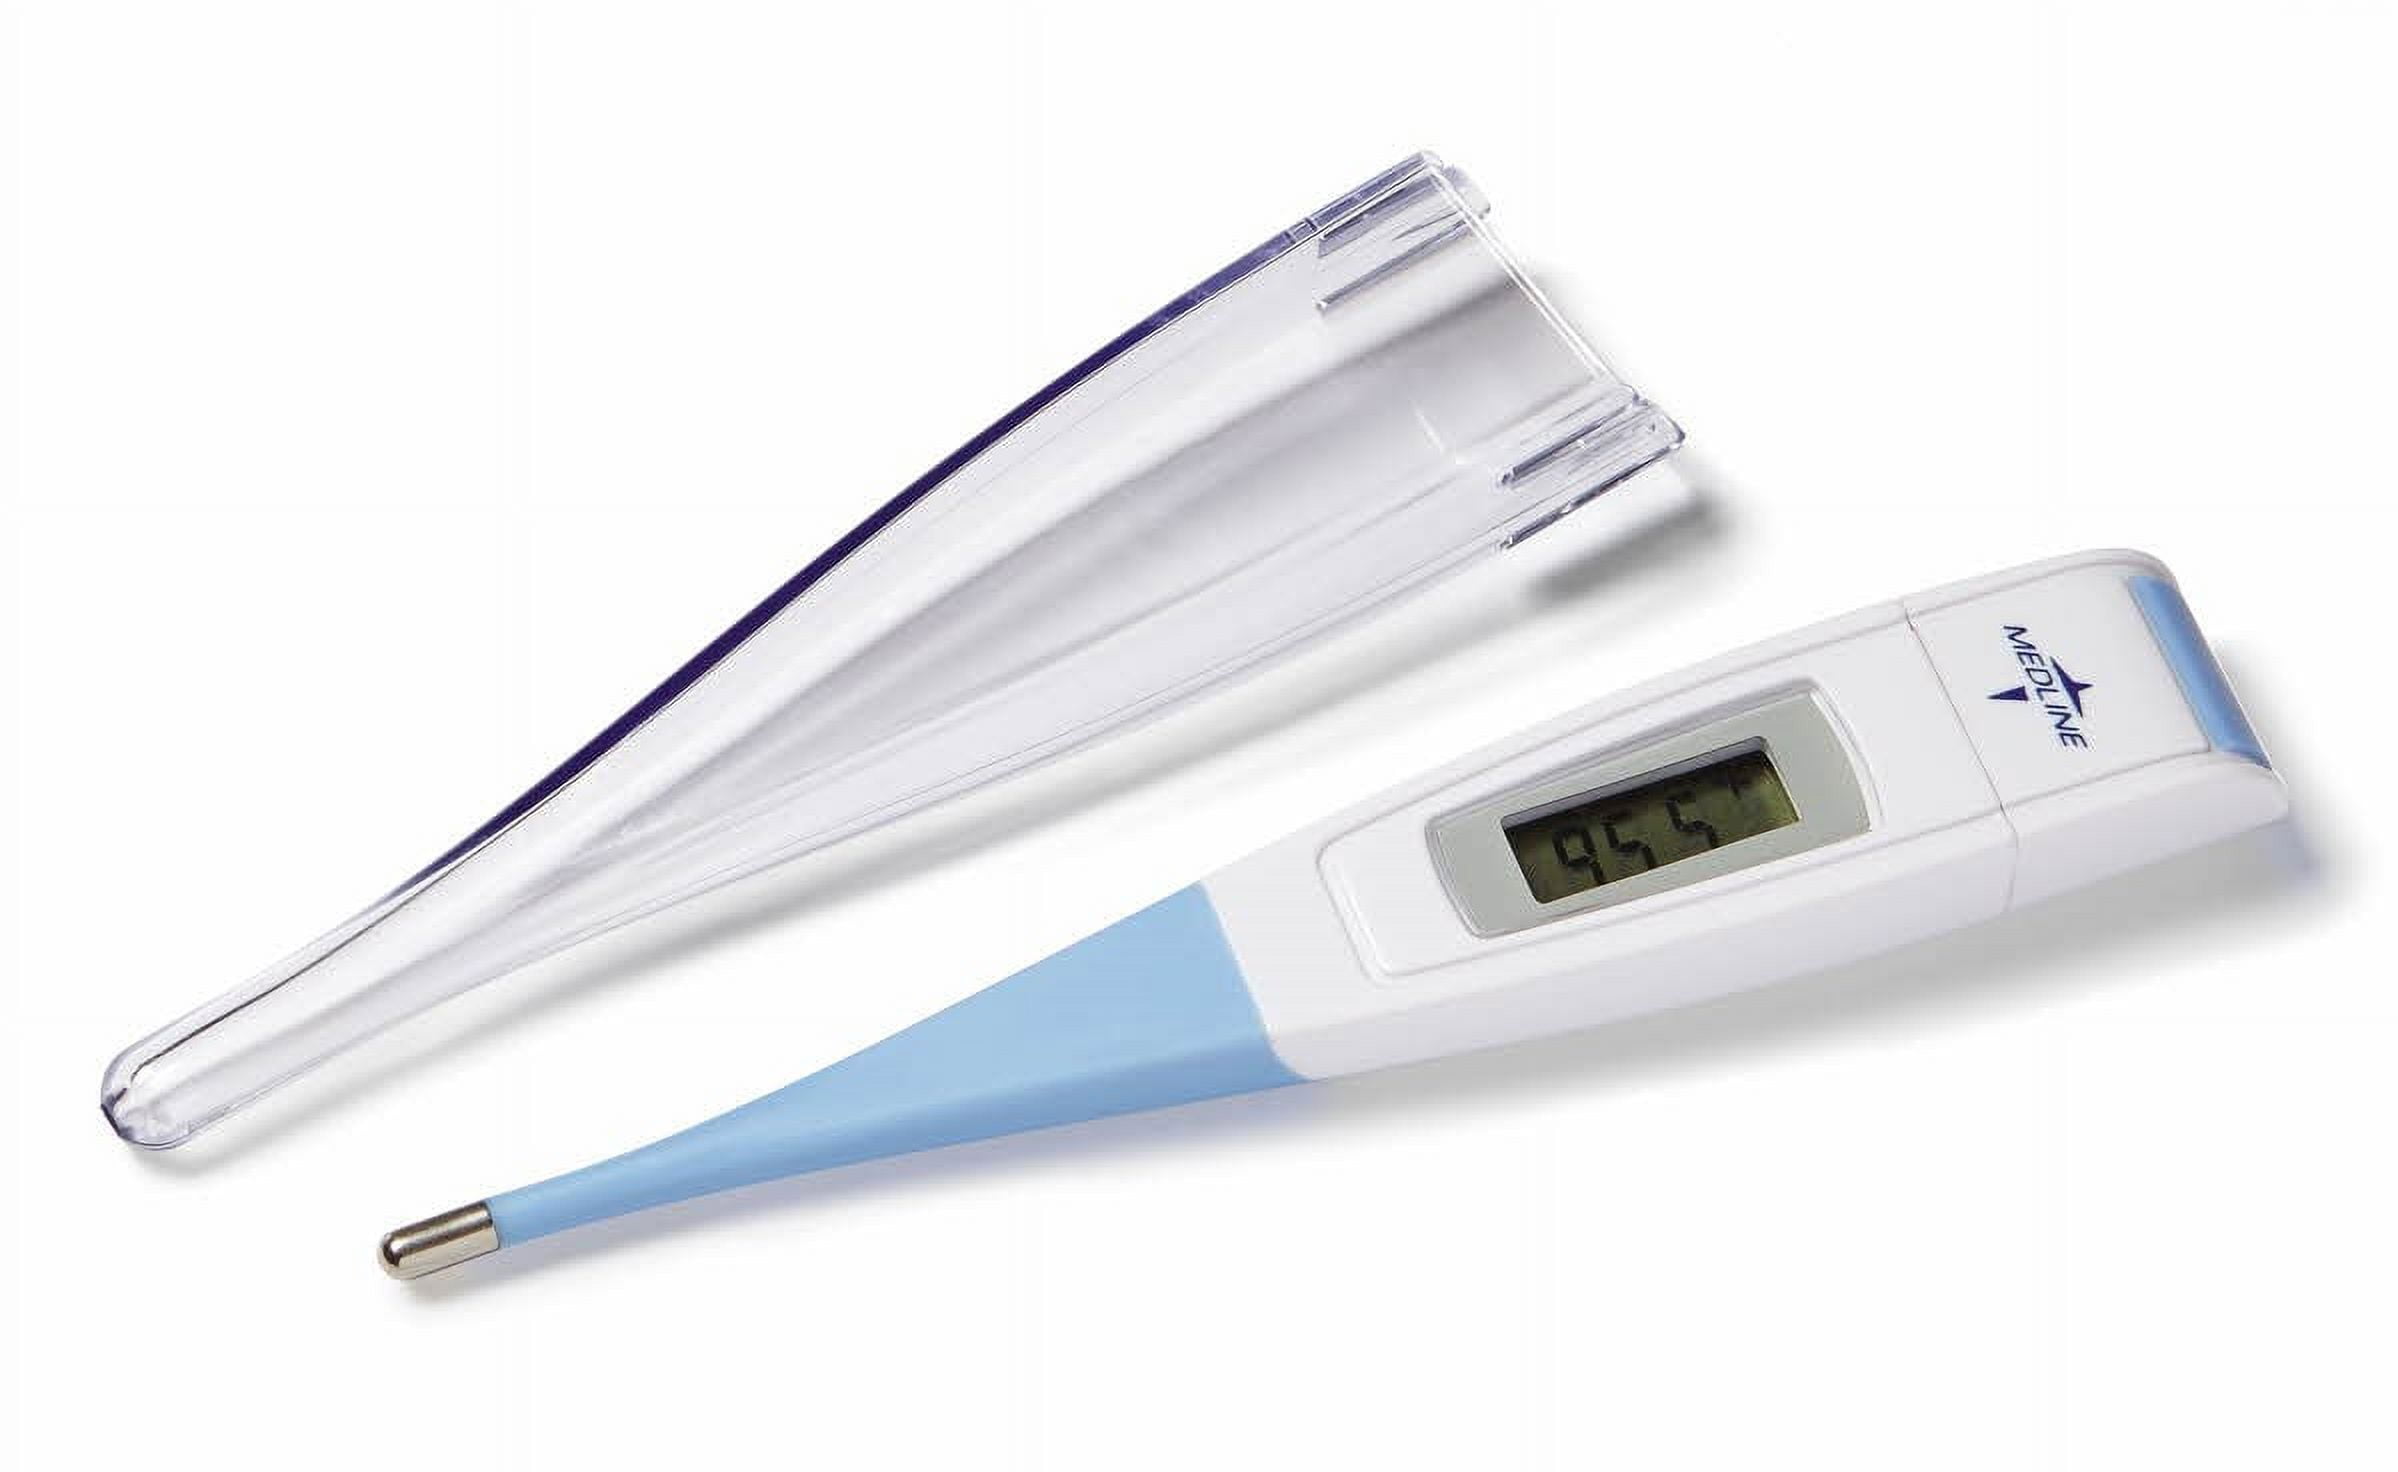 Flex Tip Digital Thermometer with Protective Case